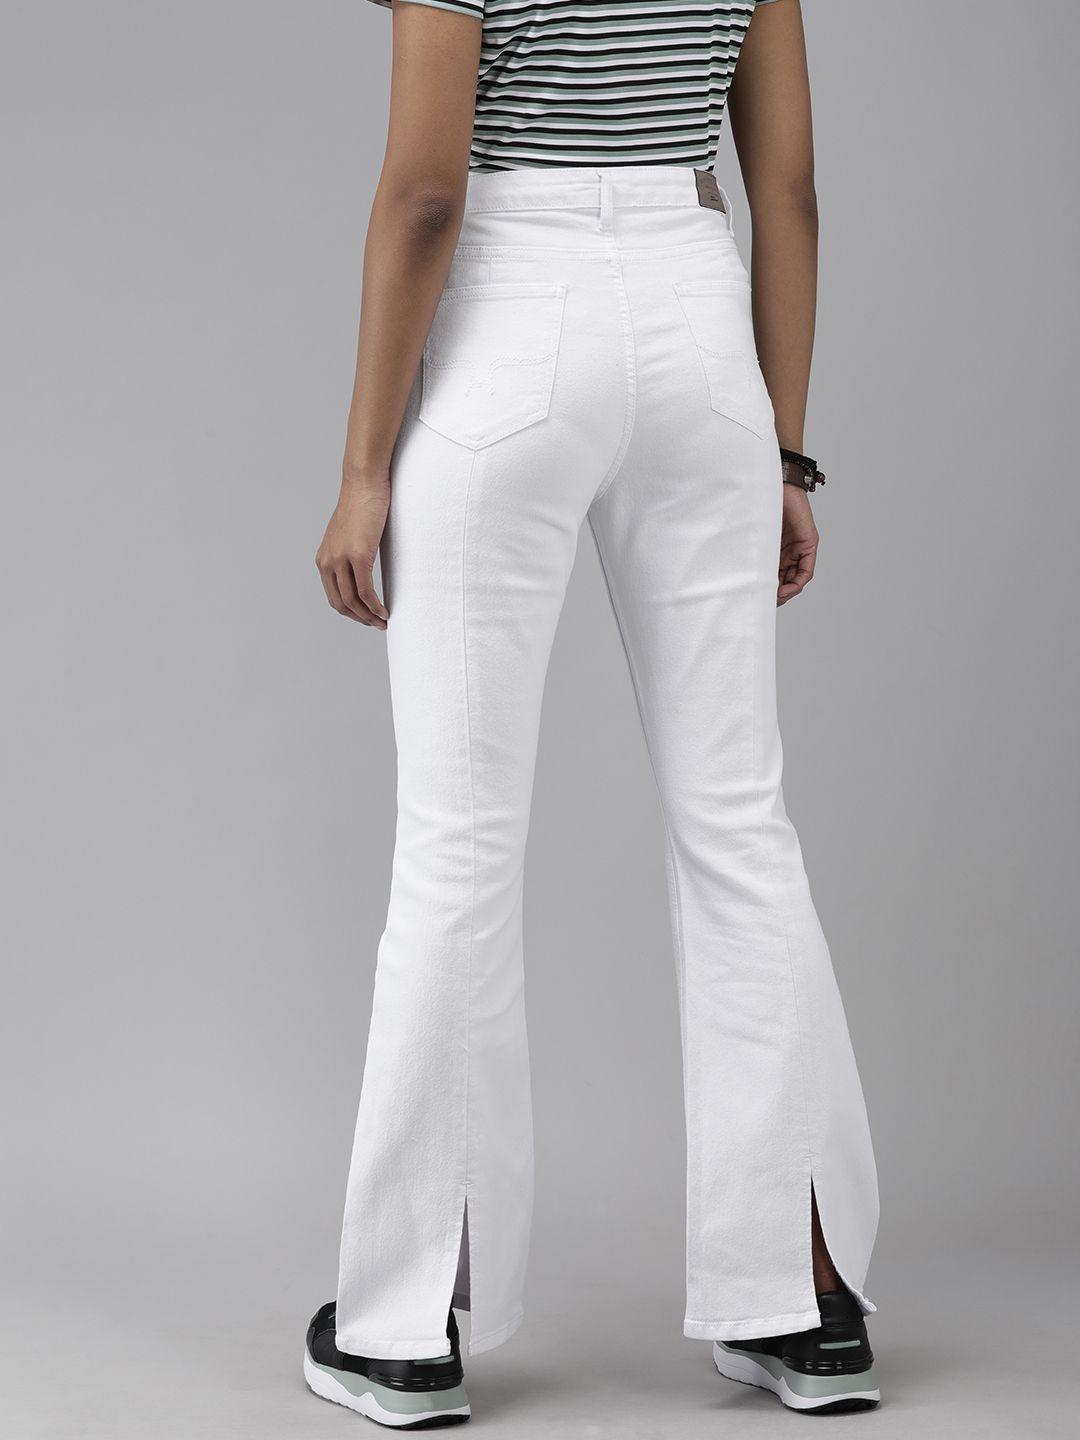 the roadster lifestyle co women white bootcut high-rise stretchable jeans